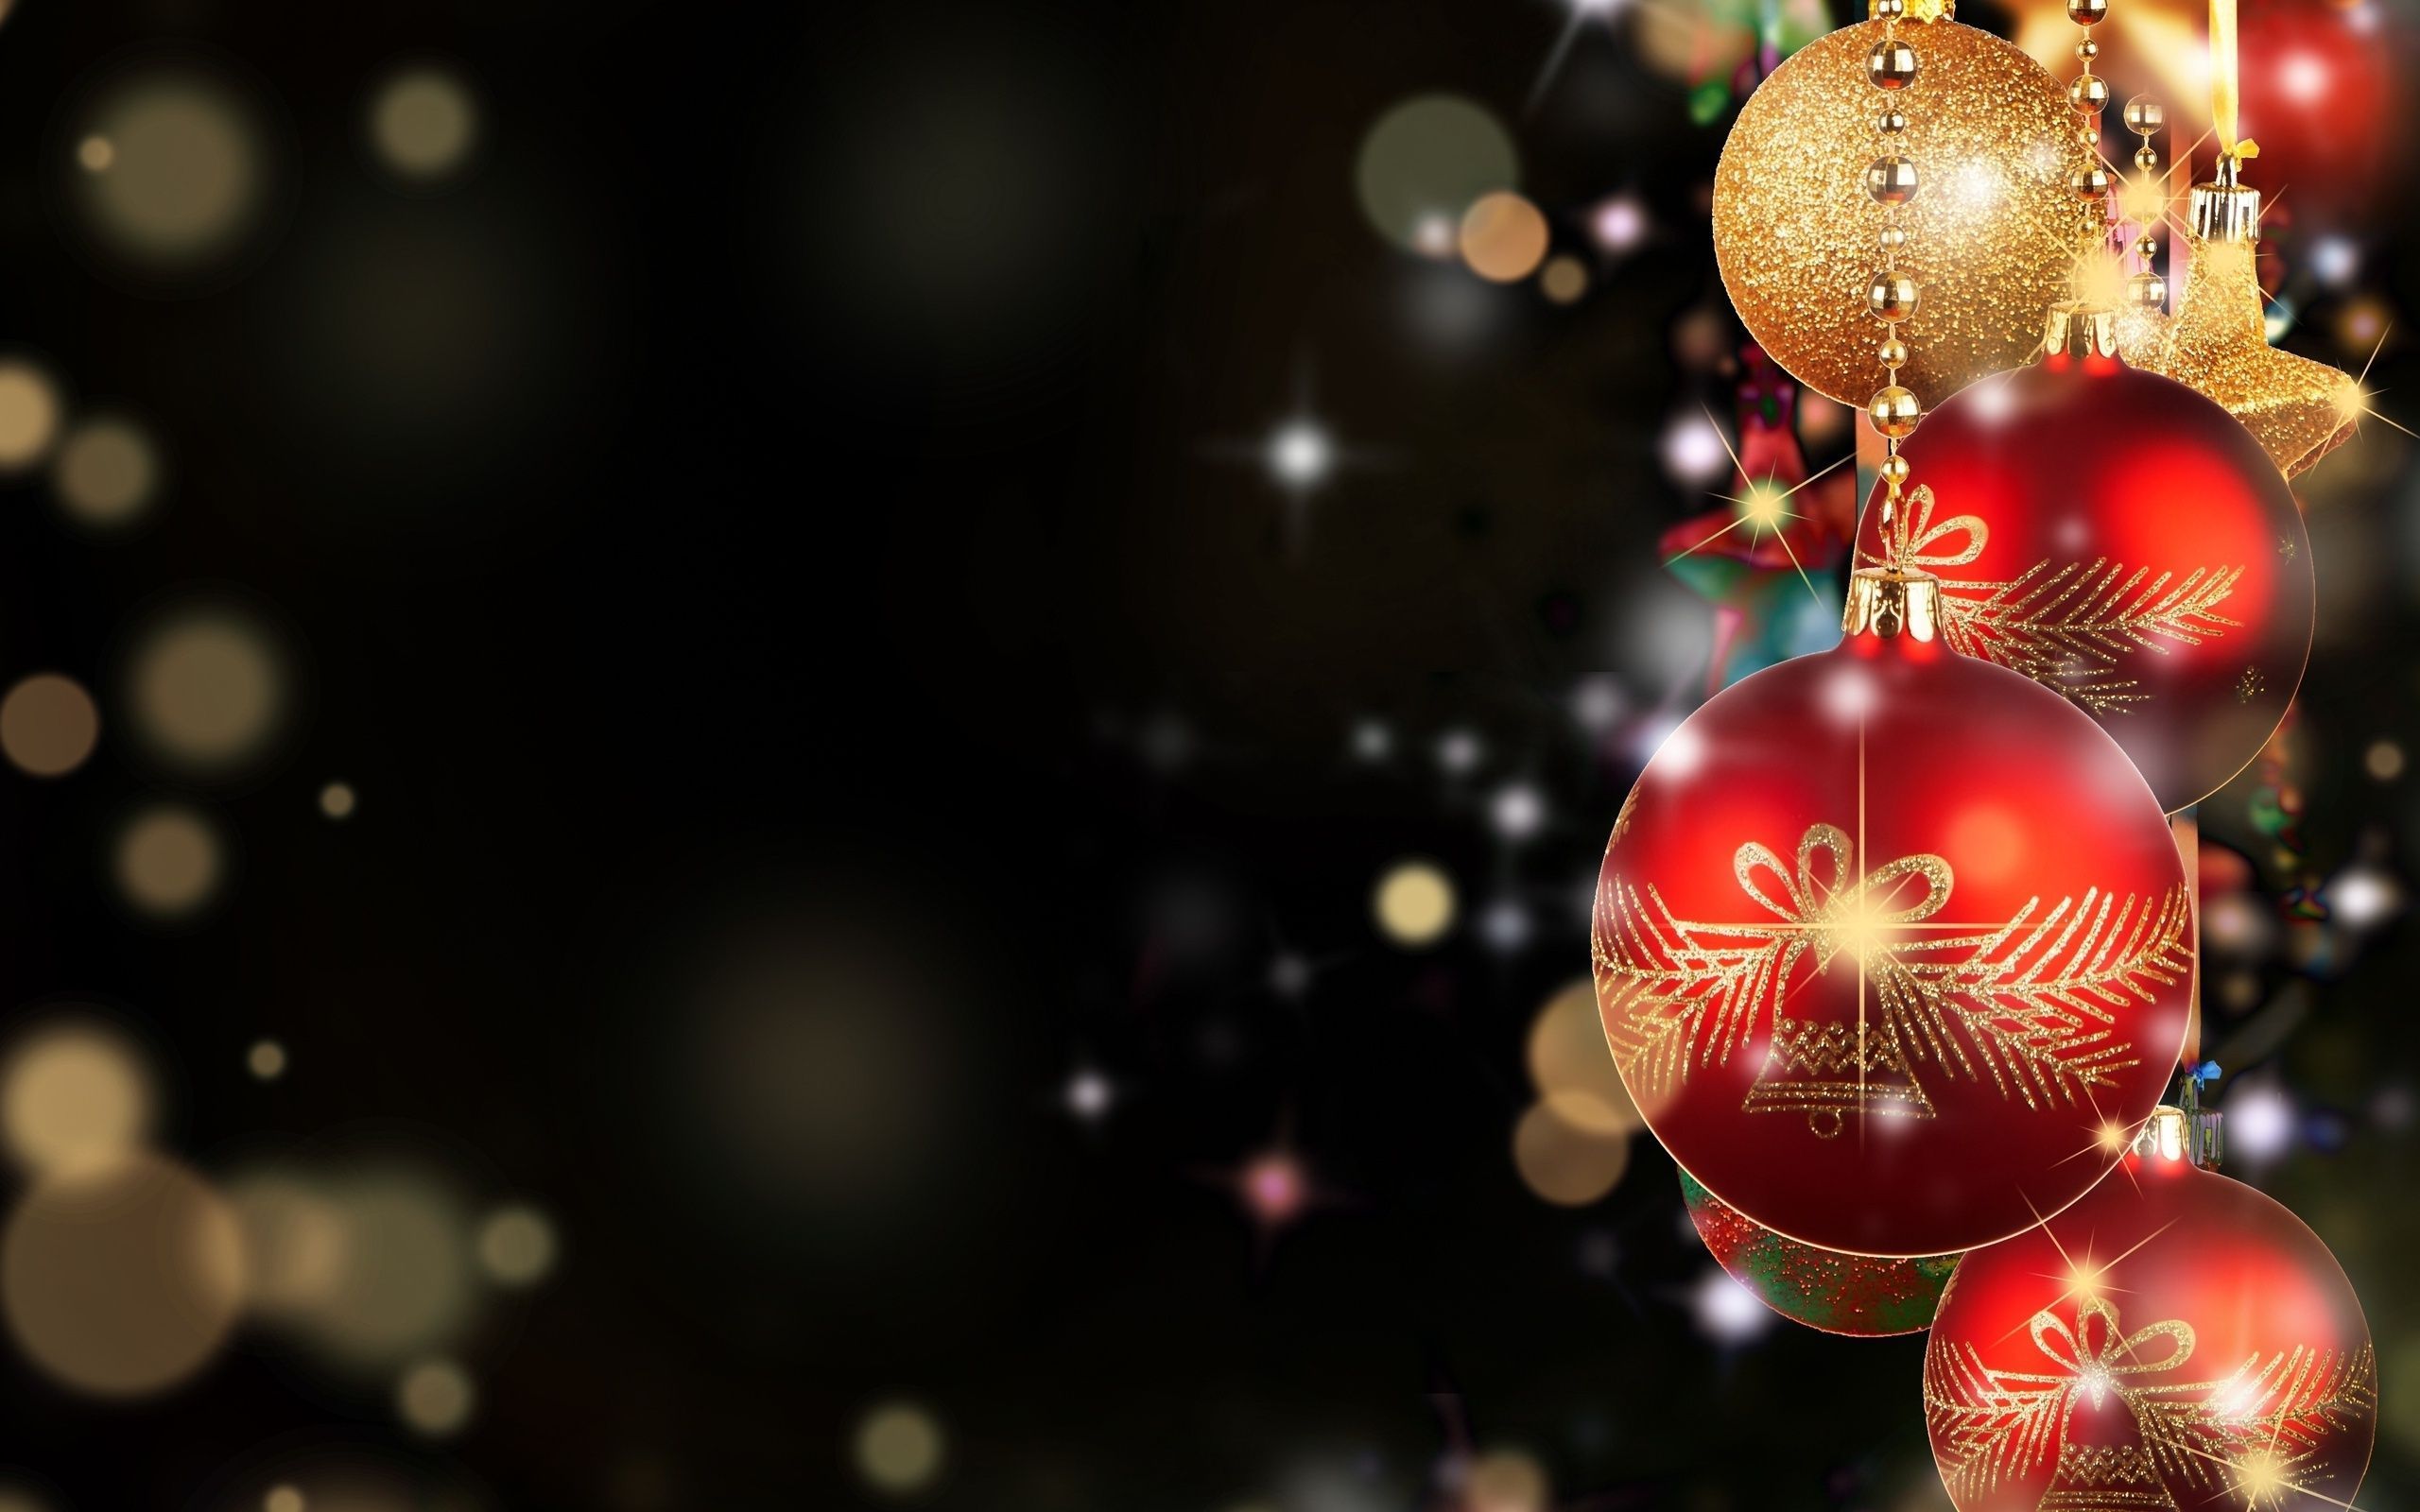 Christmas wallpaper hd - images, photos, pics, pictures | Full ...